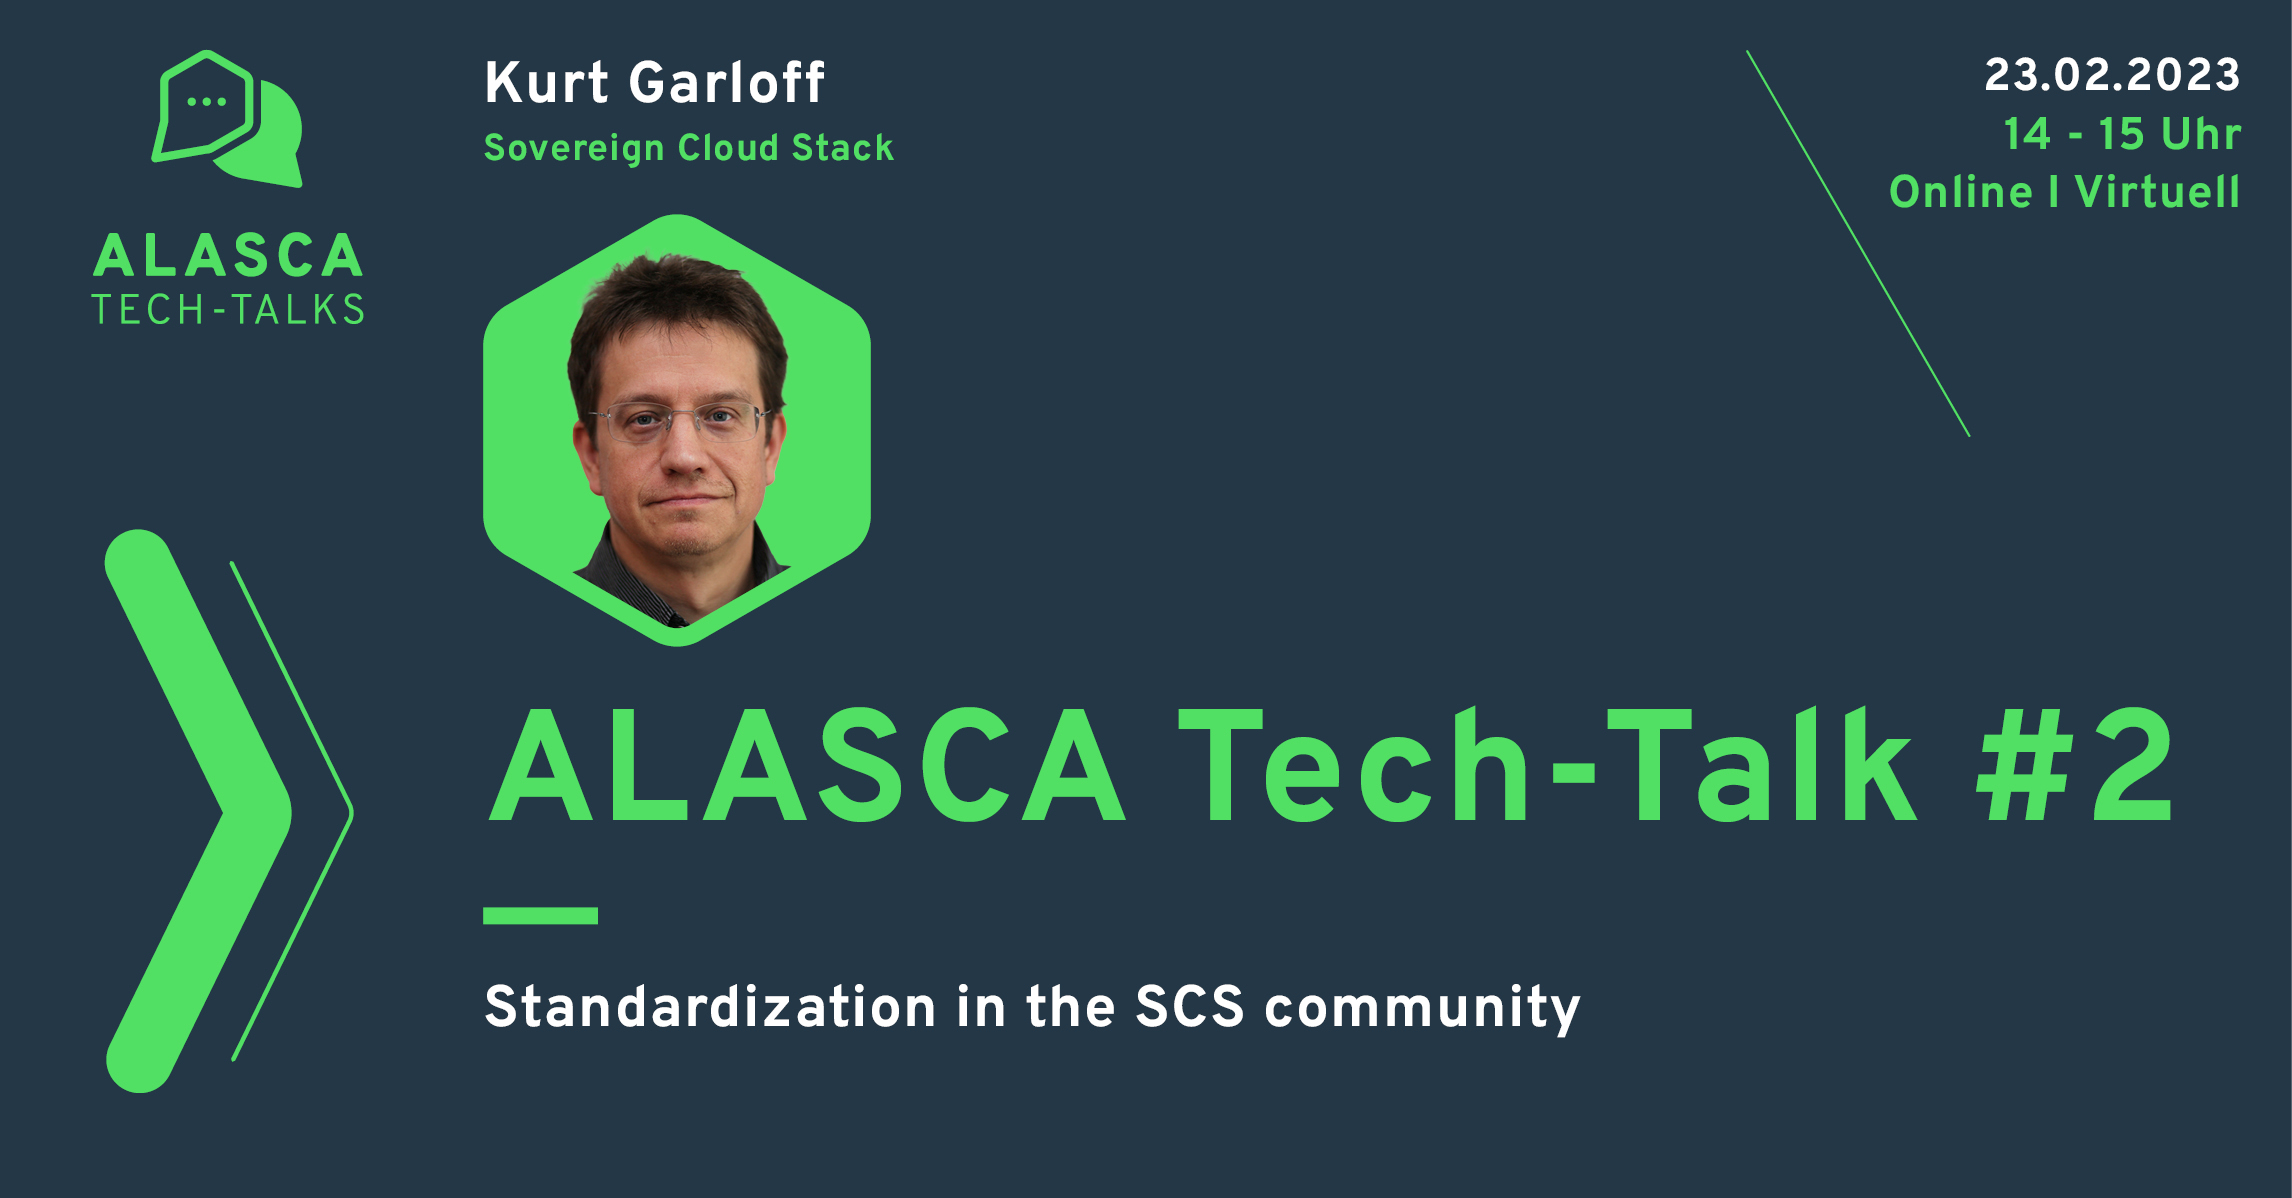 ALASCA | Tech-Tak #2 | Sovereign Cloud Stack (SCS): "Standardization in the SCS community"